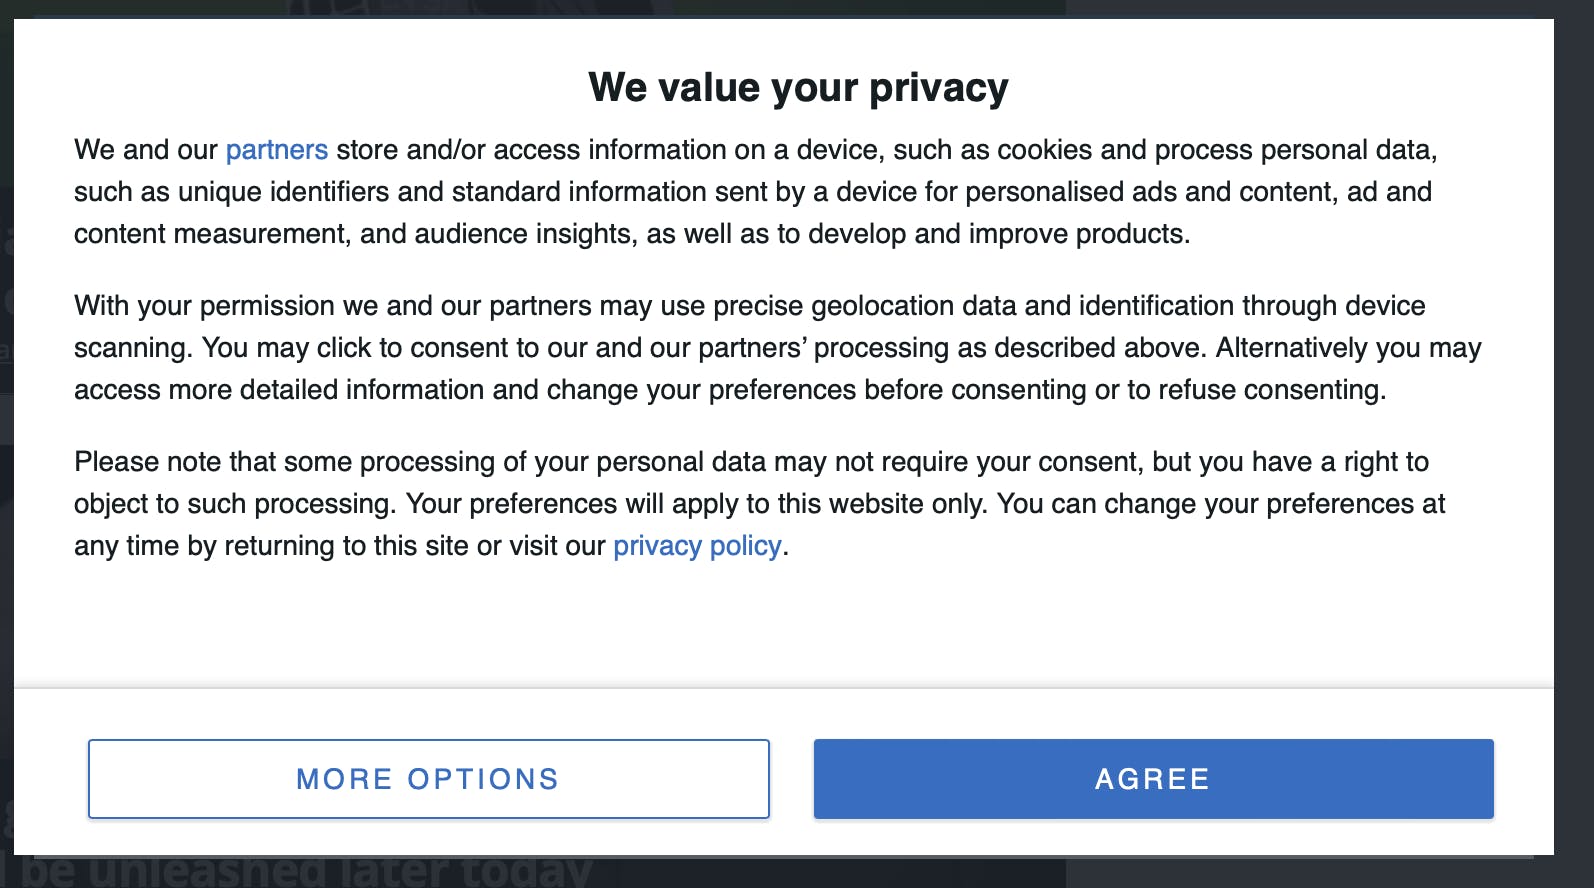 Cookie banner saying "We value your privacy"